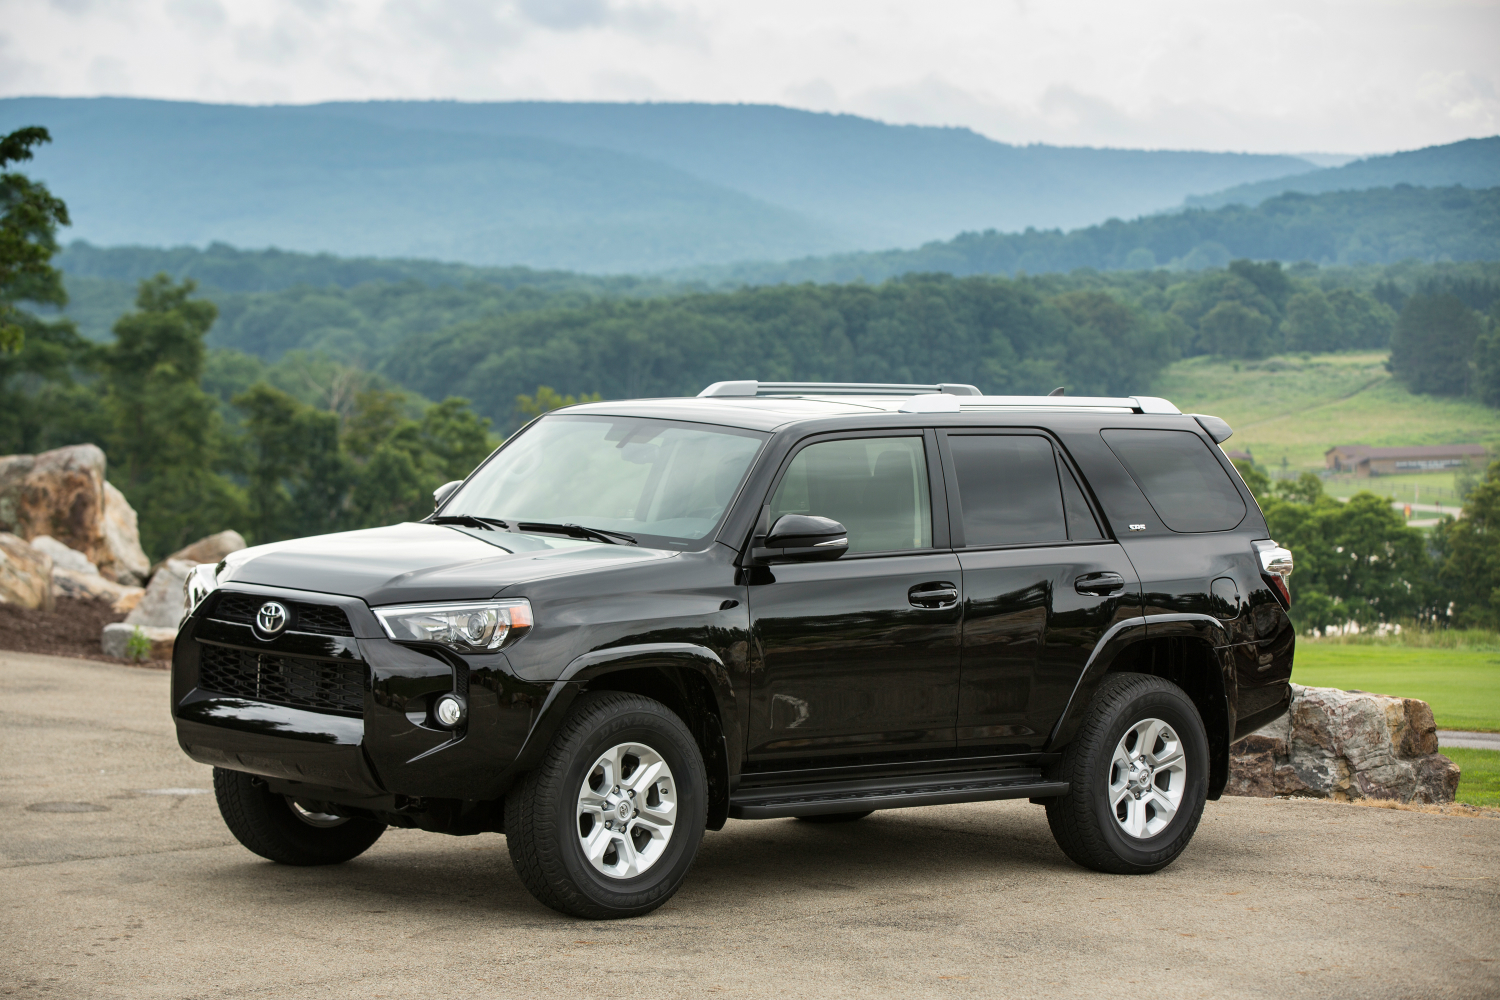 2018 toyota 4runner specs release date price performance 05